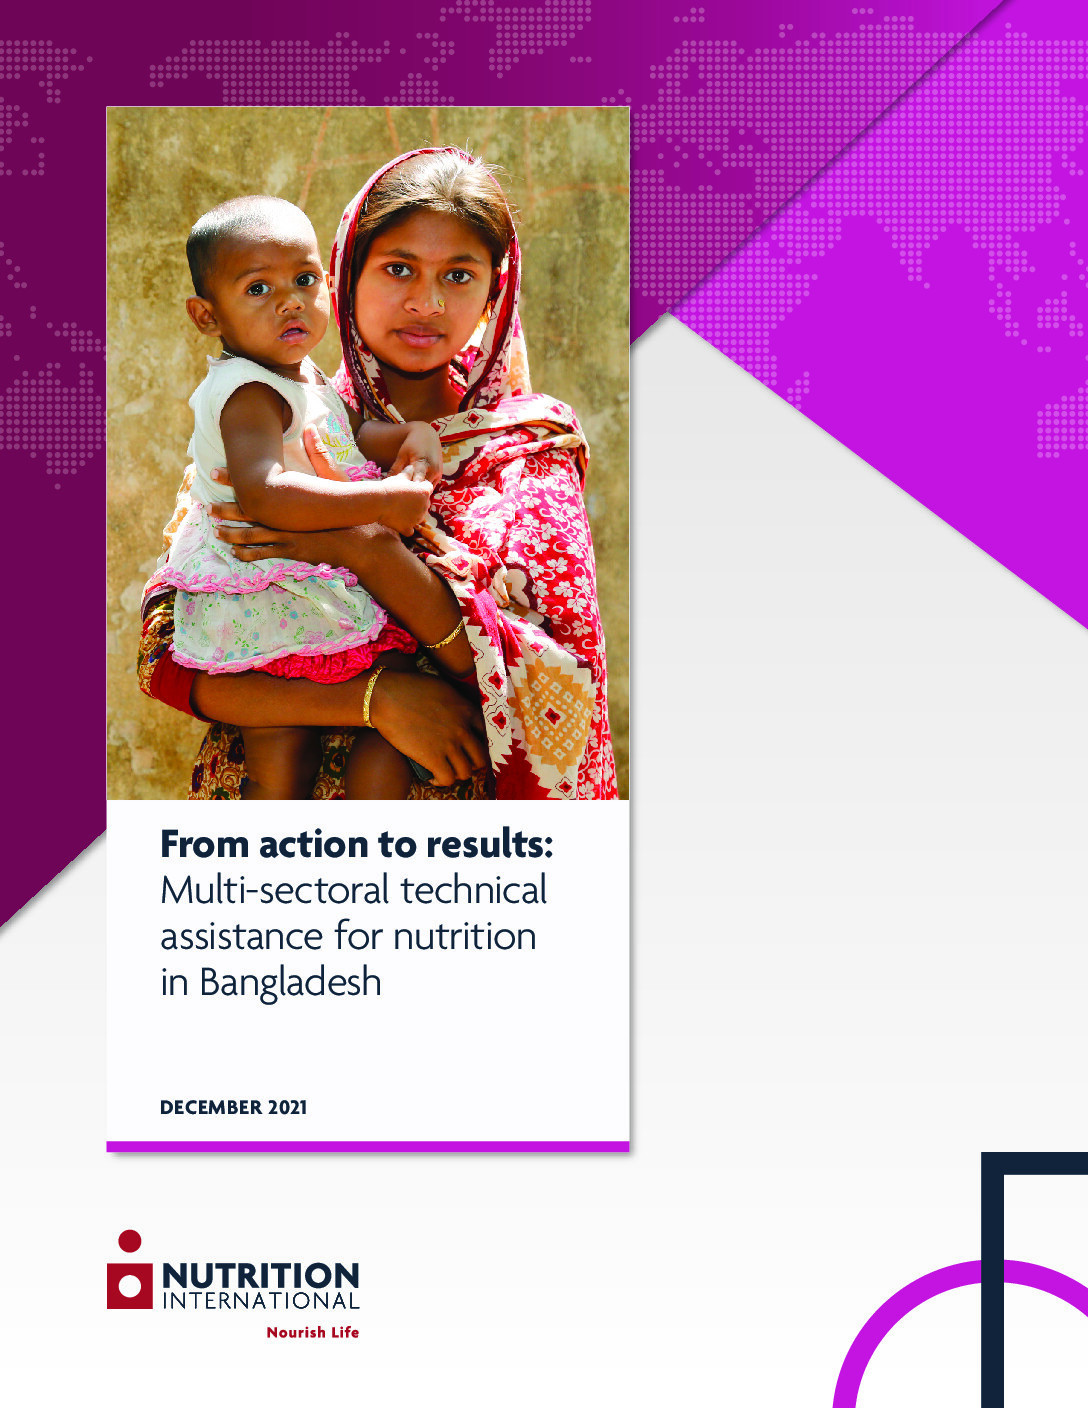 From action to results: Multi-sectoral technical assistance for nutrition in Bangladesh thumbnail